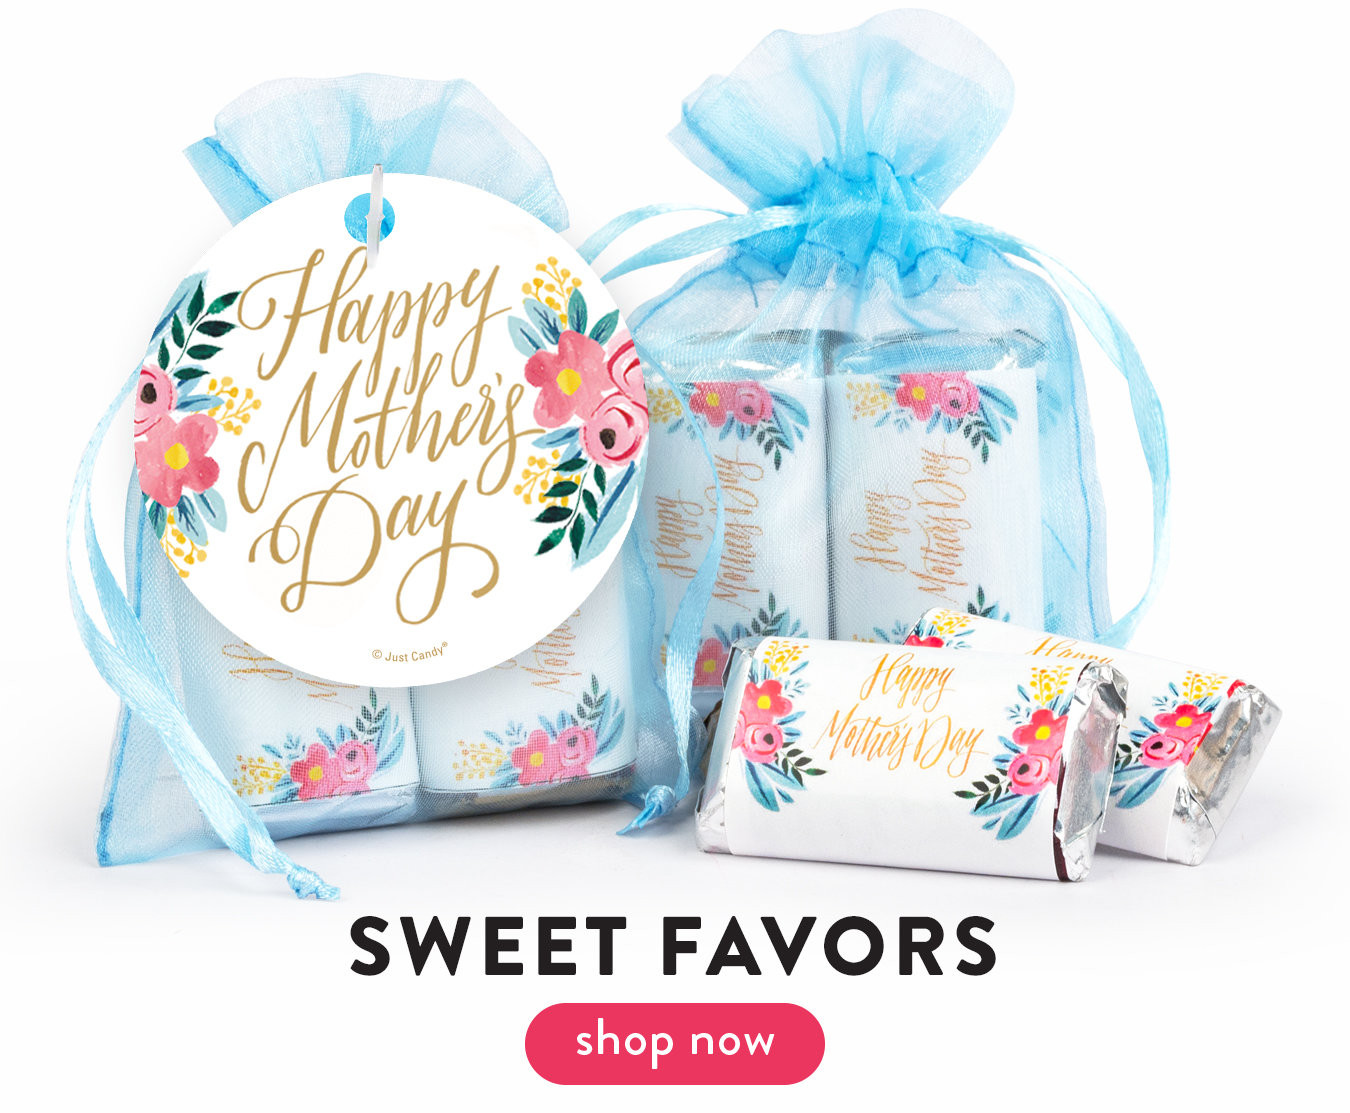 Christian Mothers Day Gifts In Bulk
 Personalized Mother s Day Candy Favors & Gifts